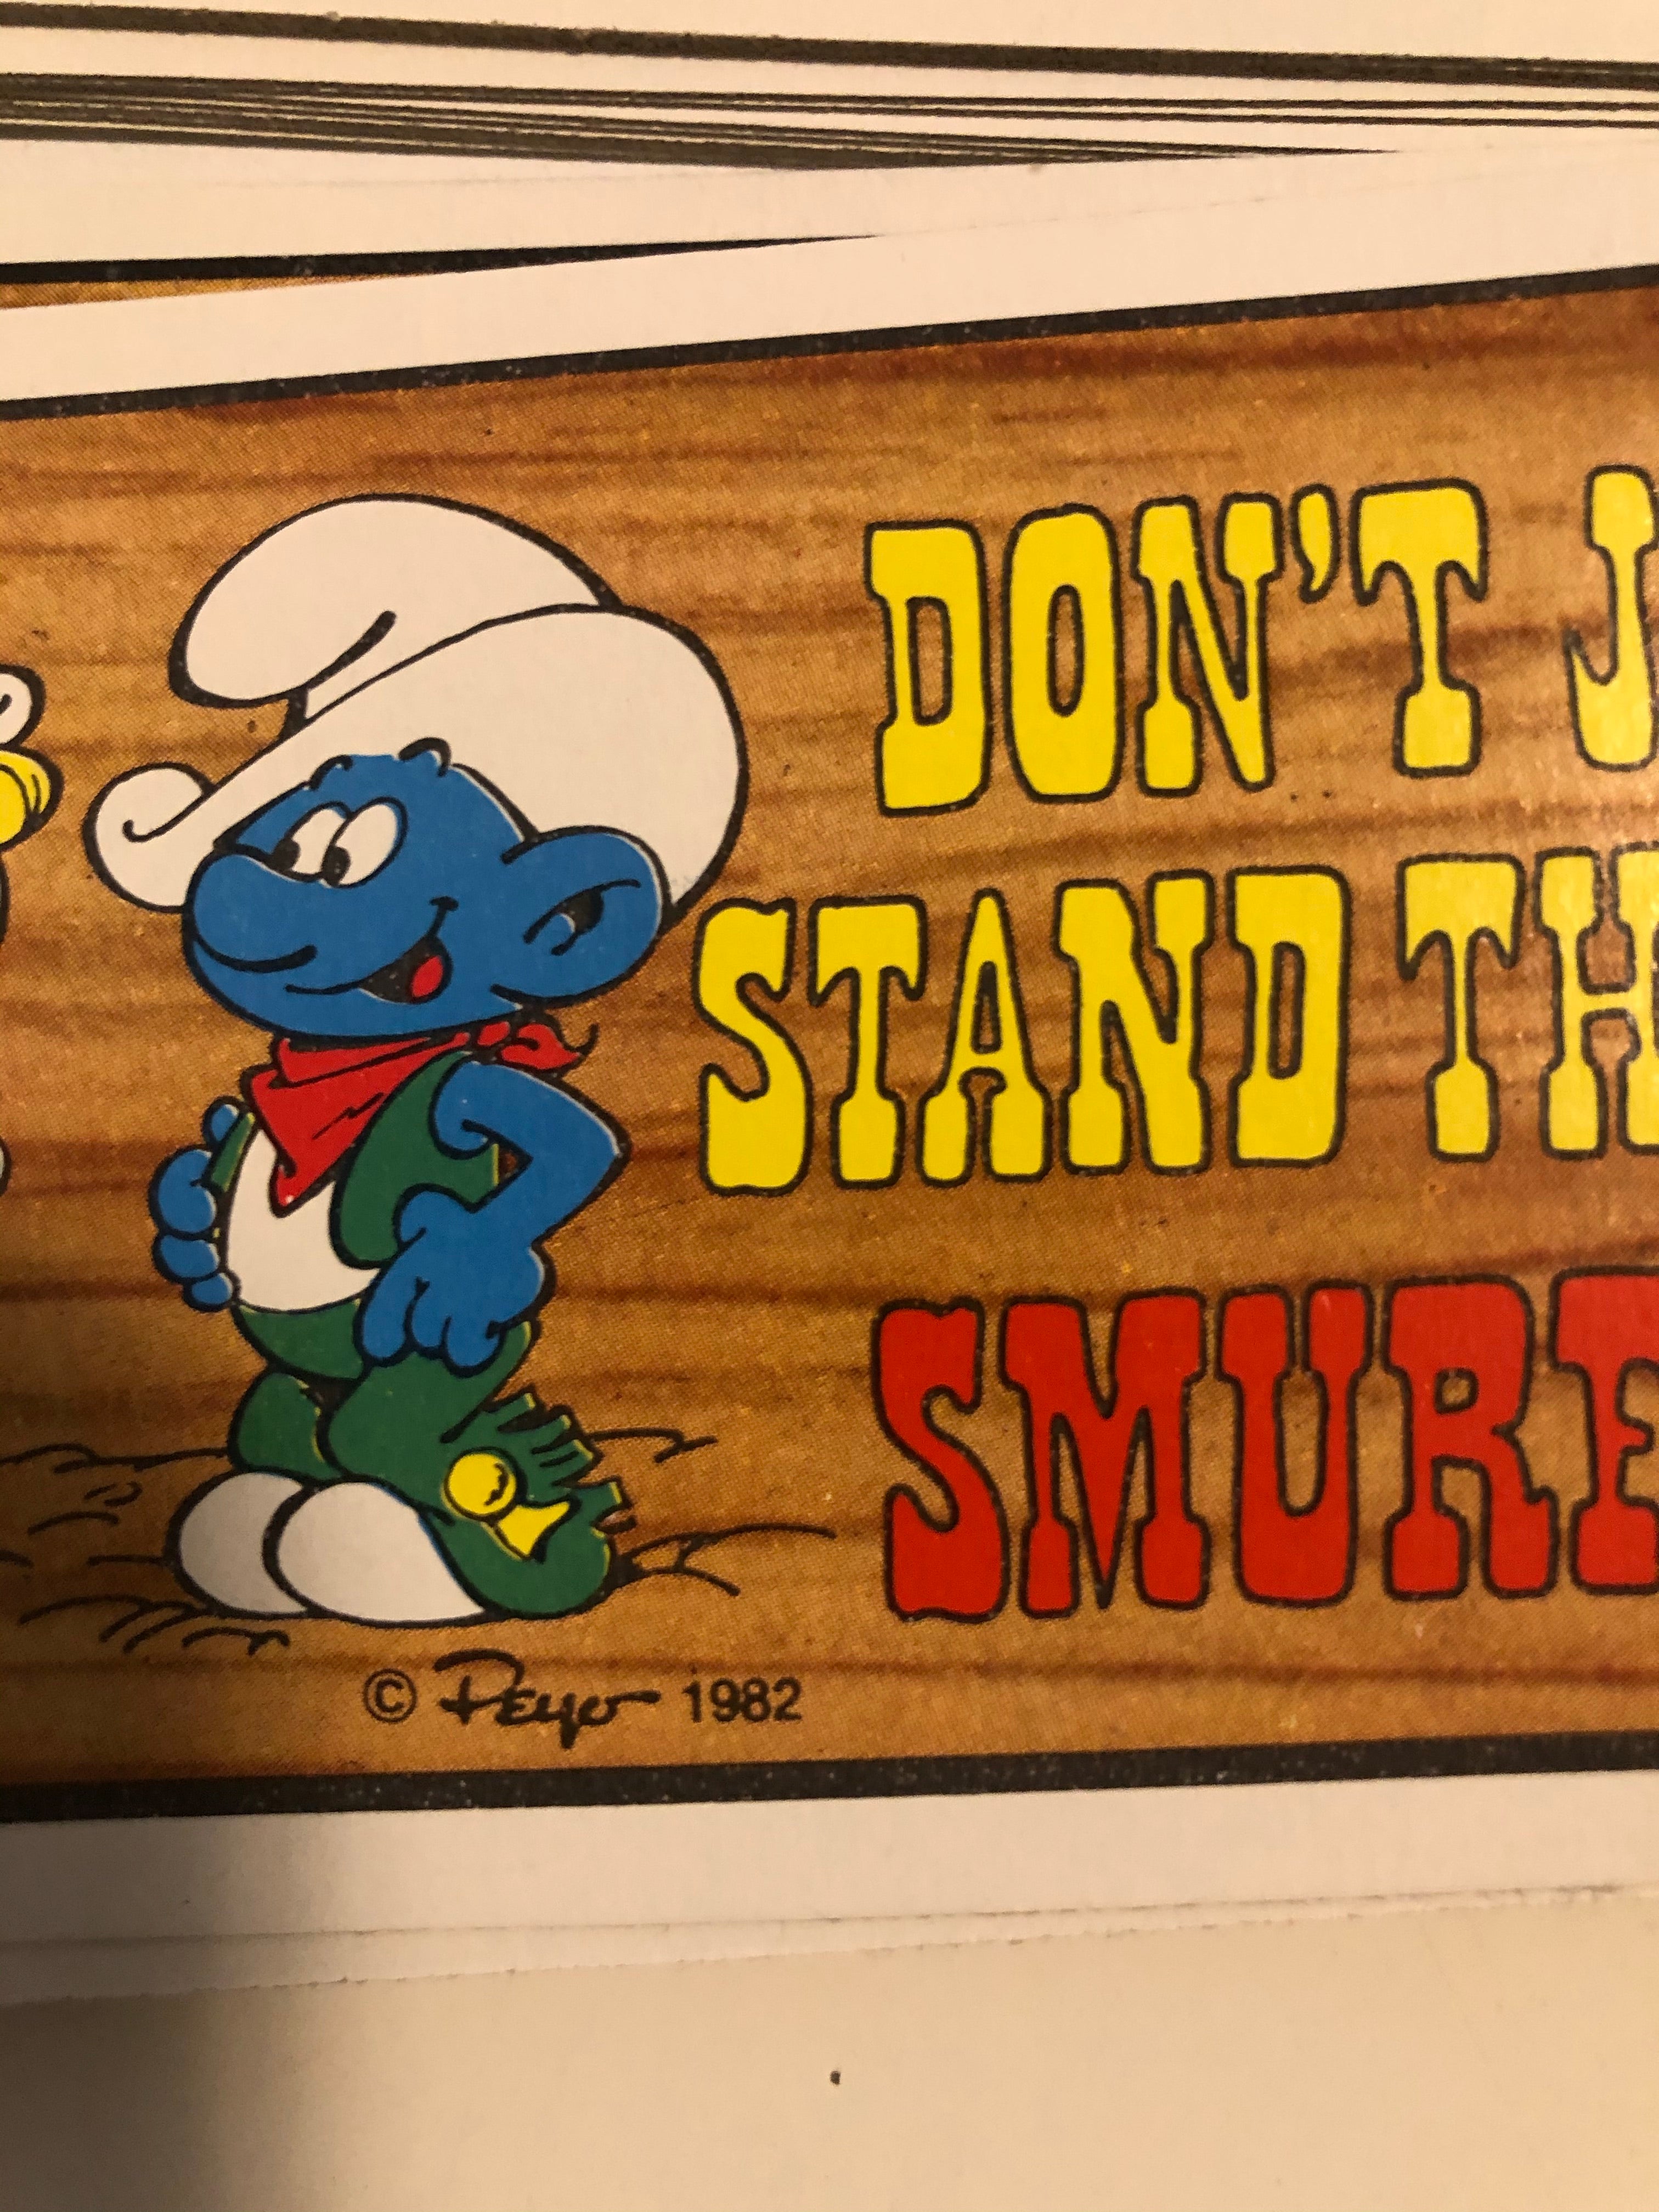 Smurf Supercards set from 1982